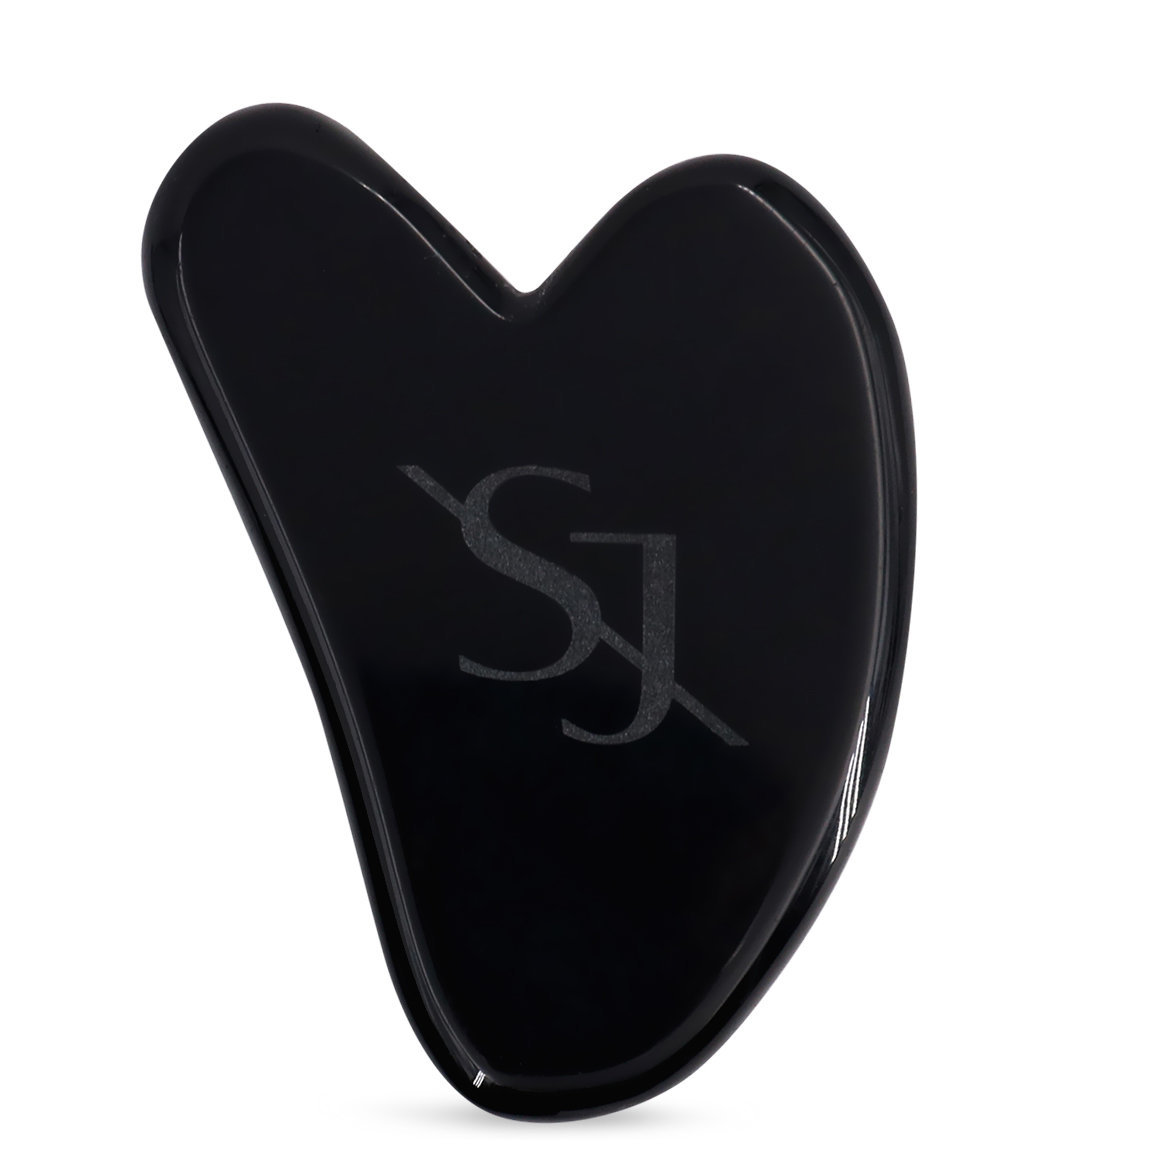 Saint Jane Beauty The Obsidian Smoothing Stone alternative view 1 - product swatch.